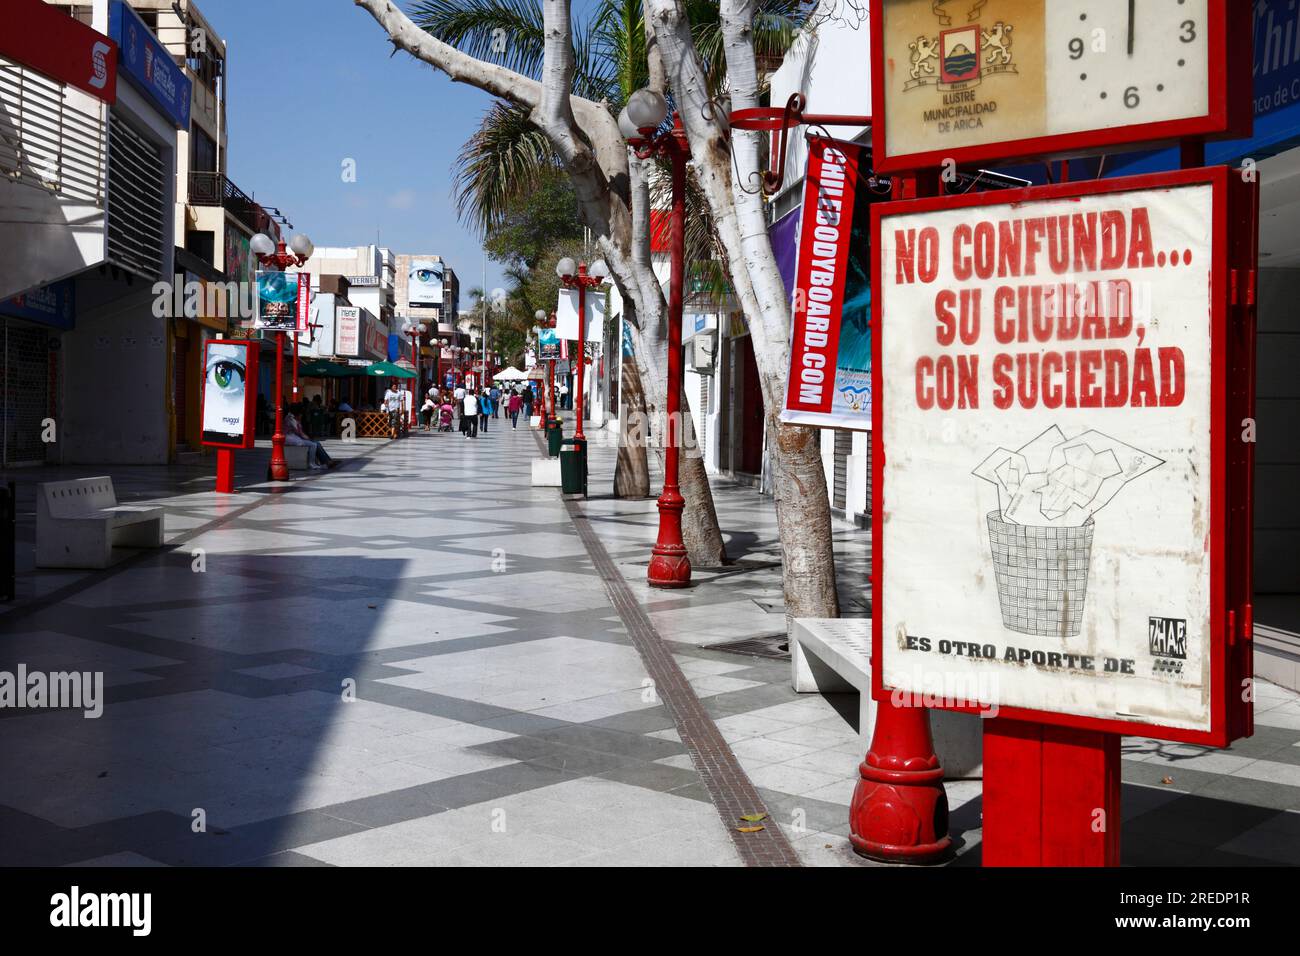 Sign in Spanish encouraging people not to throw litter in the streets on pedestrian Av 21 de Mayo street, Arica, Chile Stock Photo